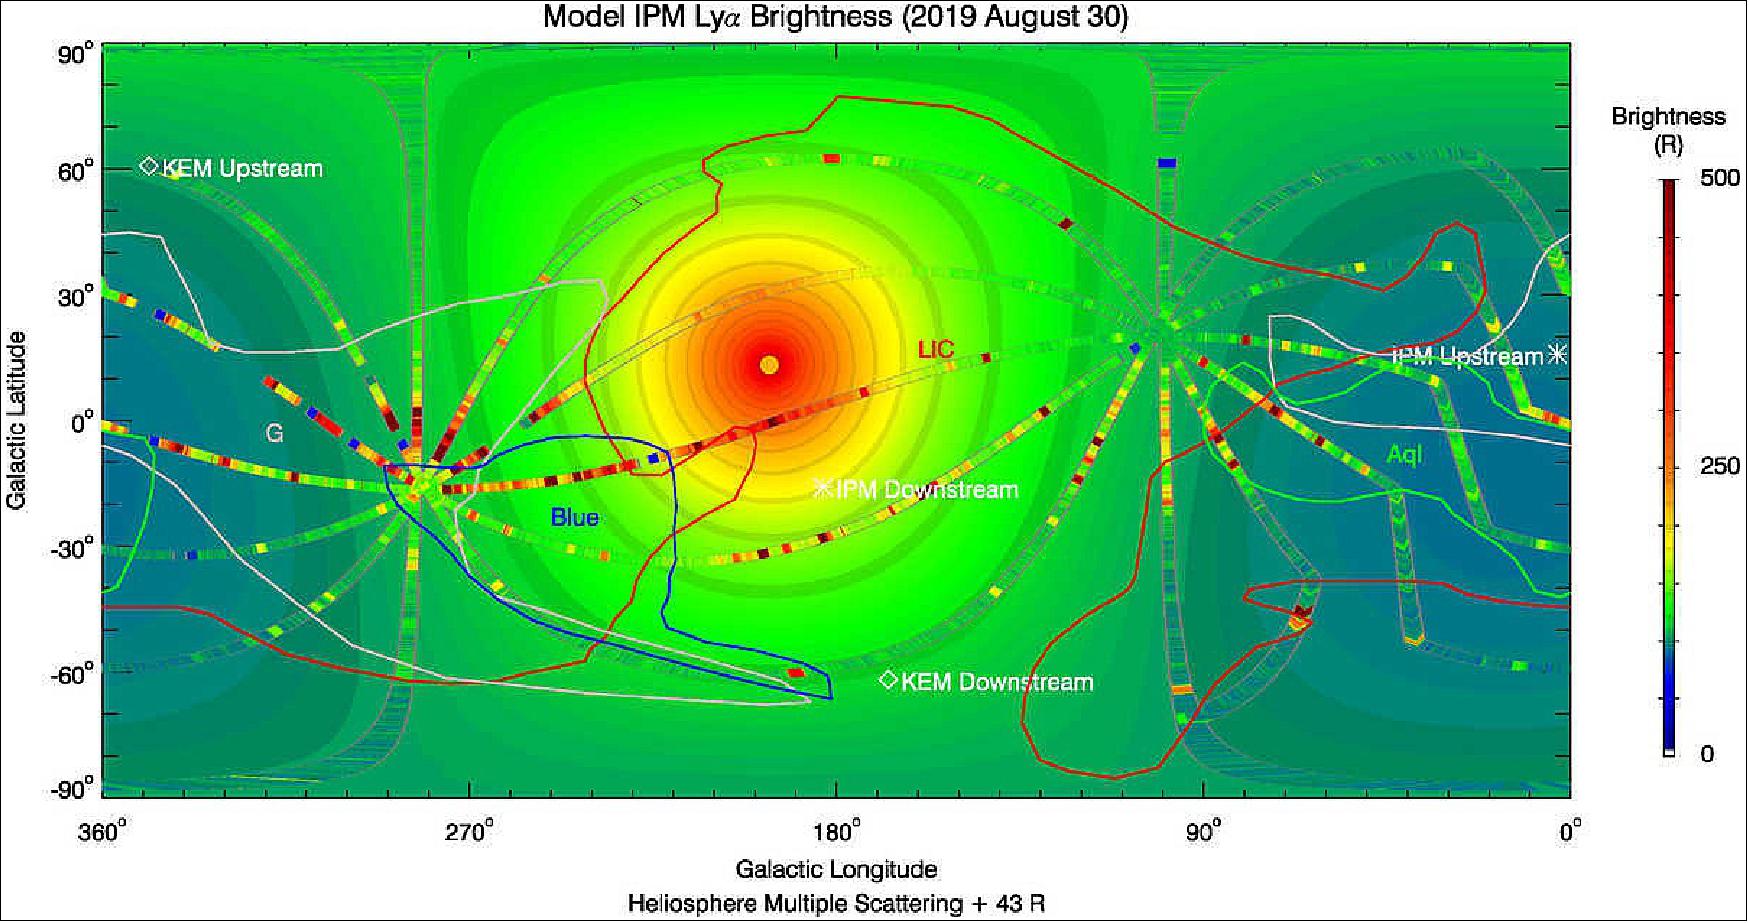 Figure 17: This false-color map shows several scans of the Lyman-alpha background over the sky, obtained by the Alice ultraviolet spectrograph on the New Horizons spacecraft when it was 45 AU from the Sun. The data agrees well with an underlying model of the solar component of the Lyman-alpha background to which a constant brightness from the Milky Way has been added. The background is brighter at both directions near our Sun, which is marked here by an orange dot (image credit: SwRI)